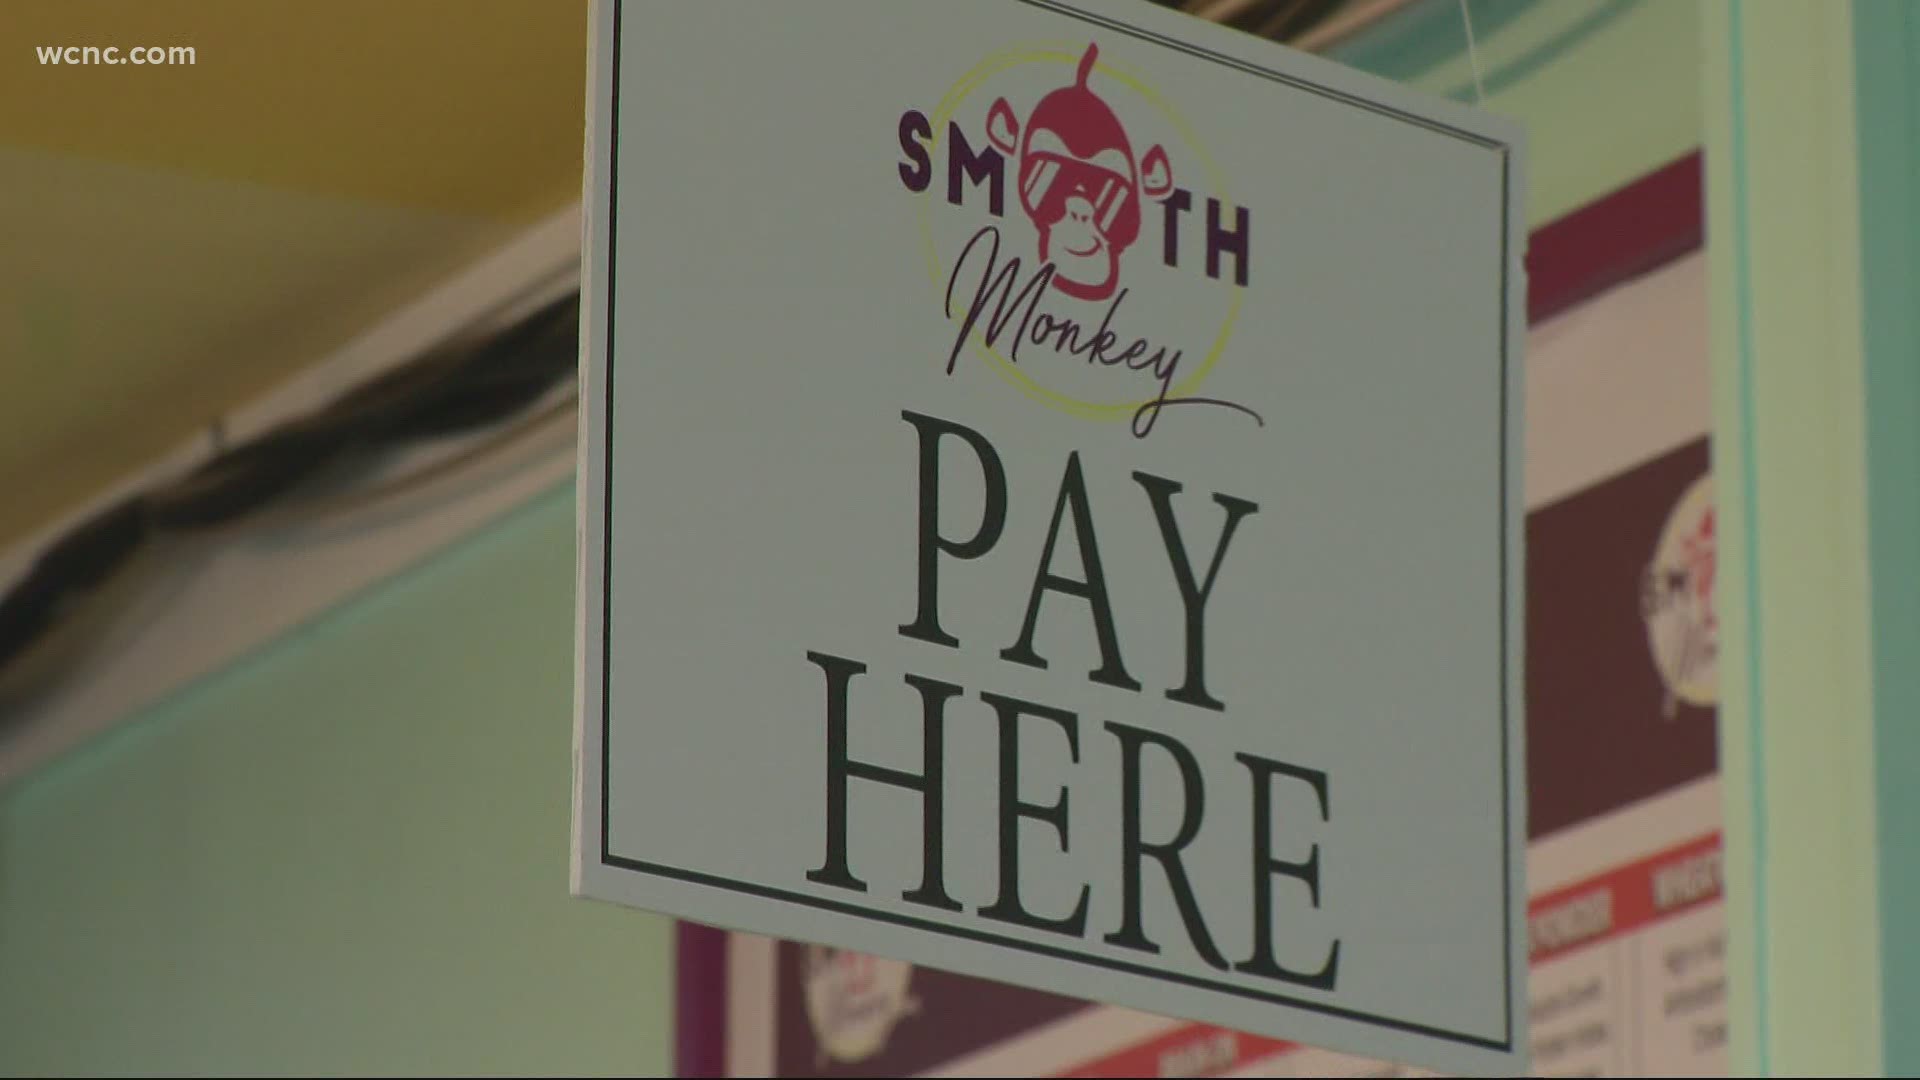 As some small businesses haven’t been allowed to reopen head into another month with no income, frustration grows as owners struggle to make ends meet.